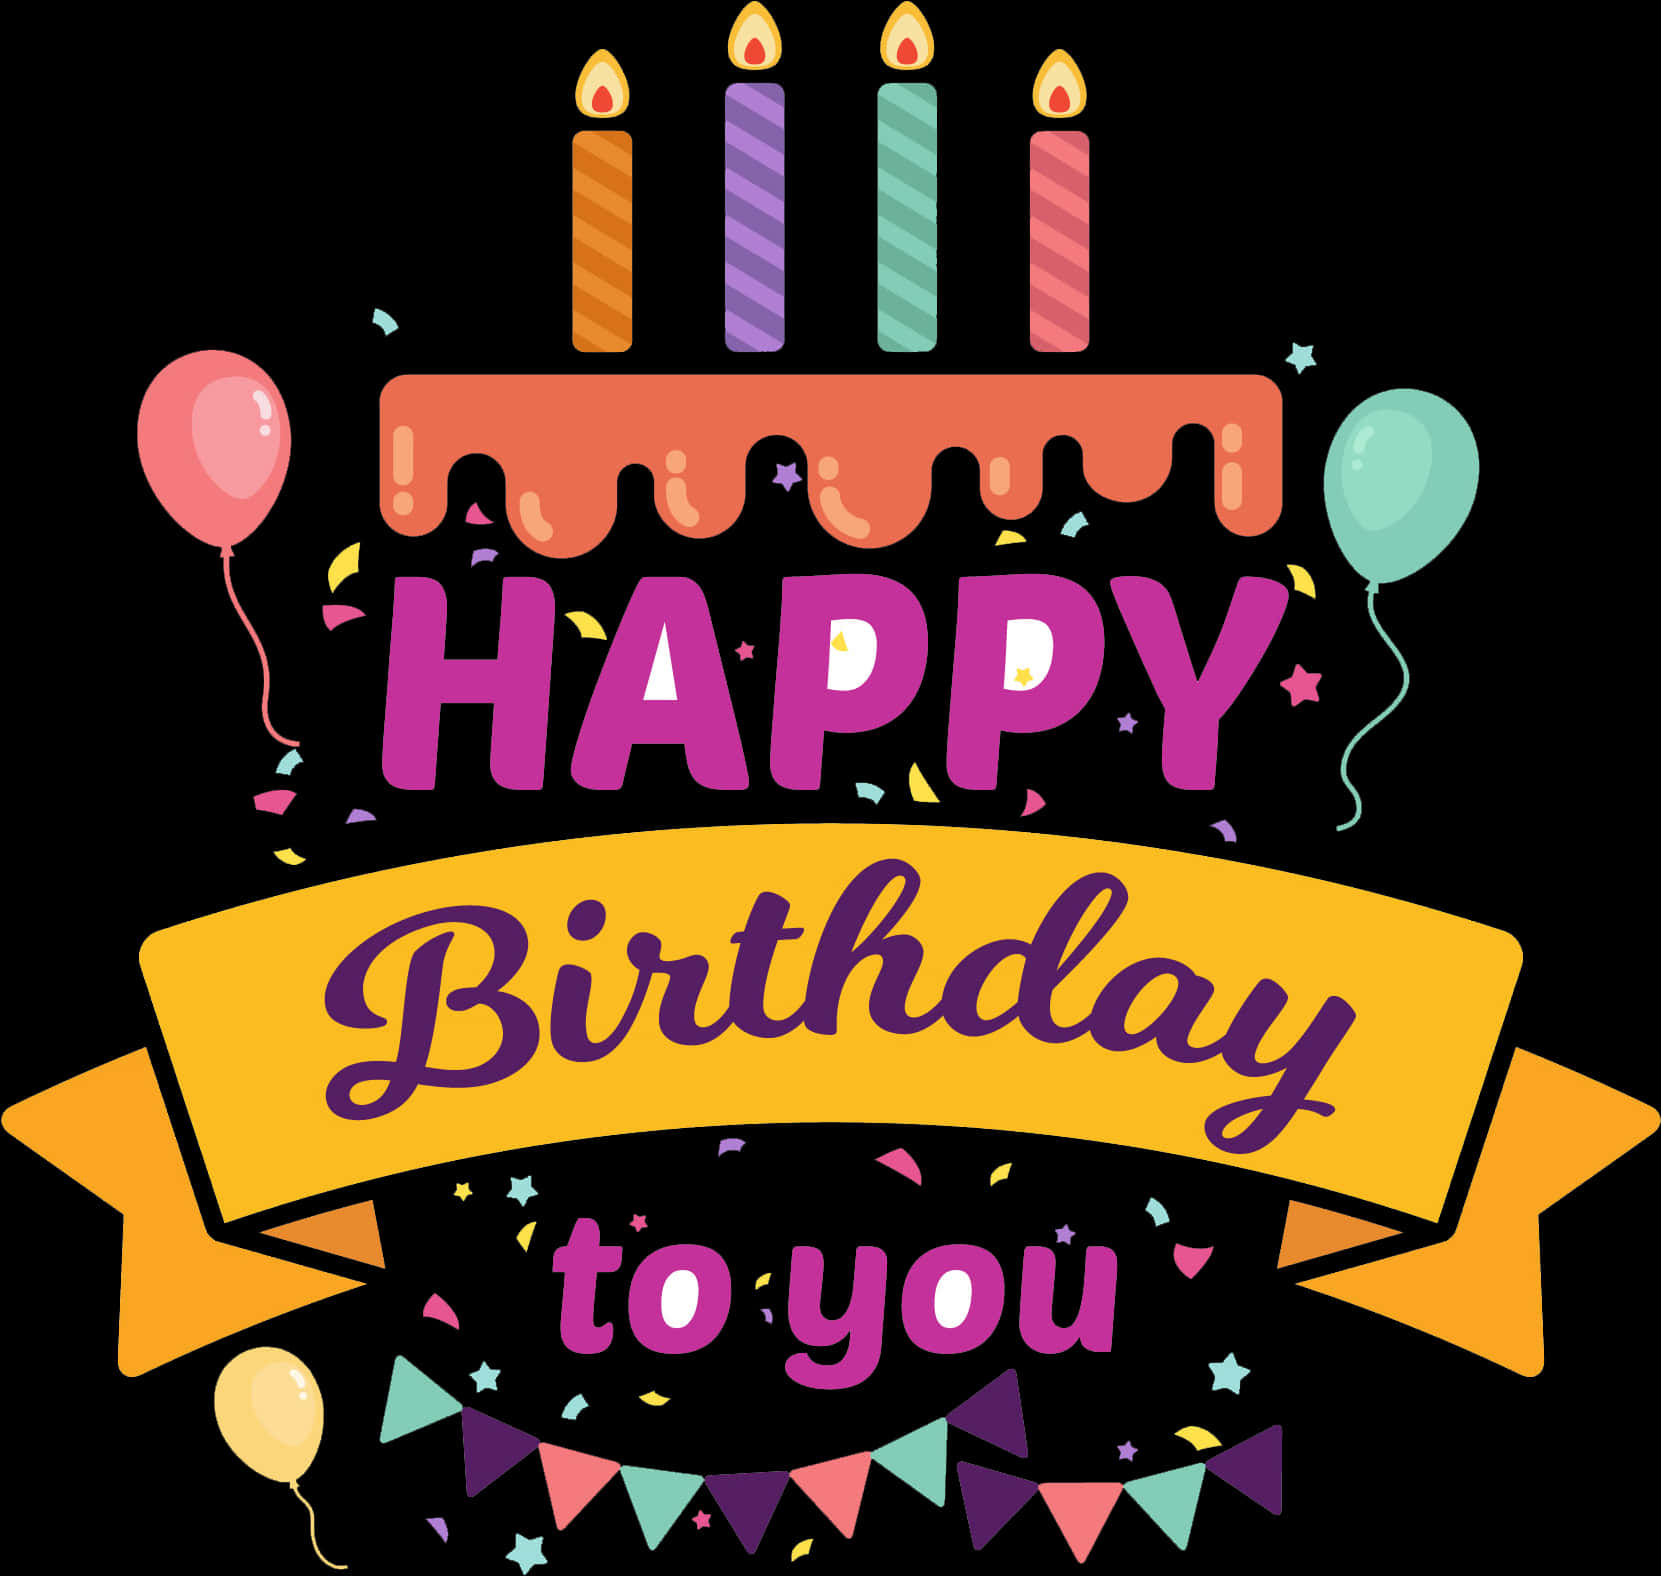 A Birthday Card With Balloons And Candles PNG